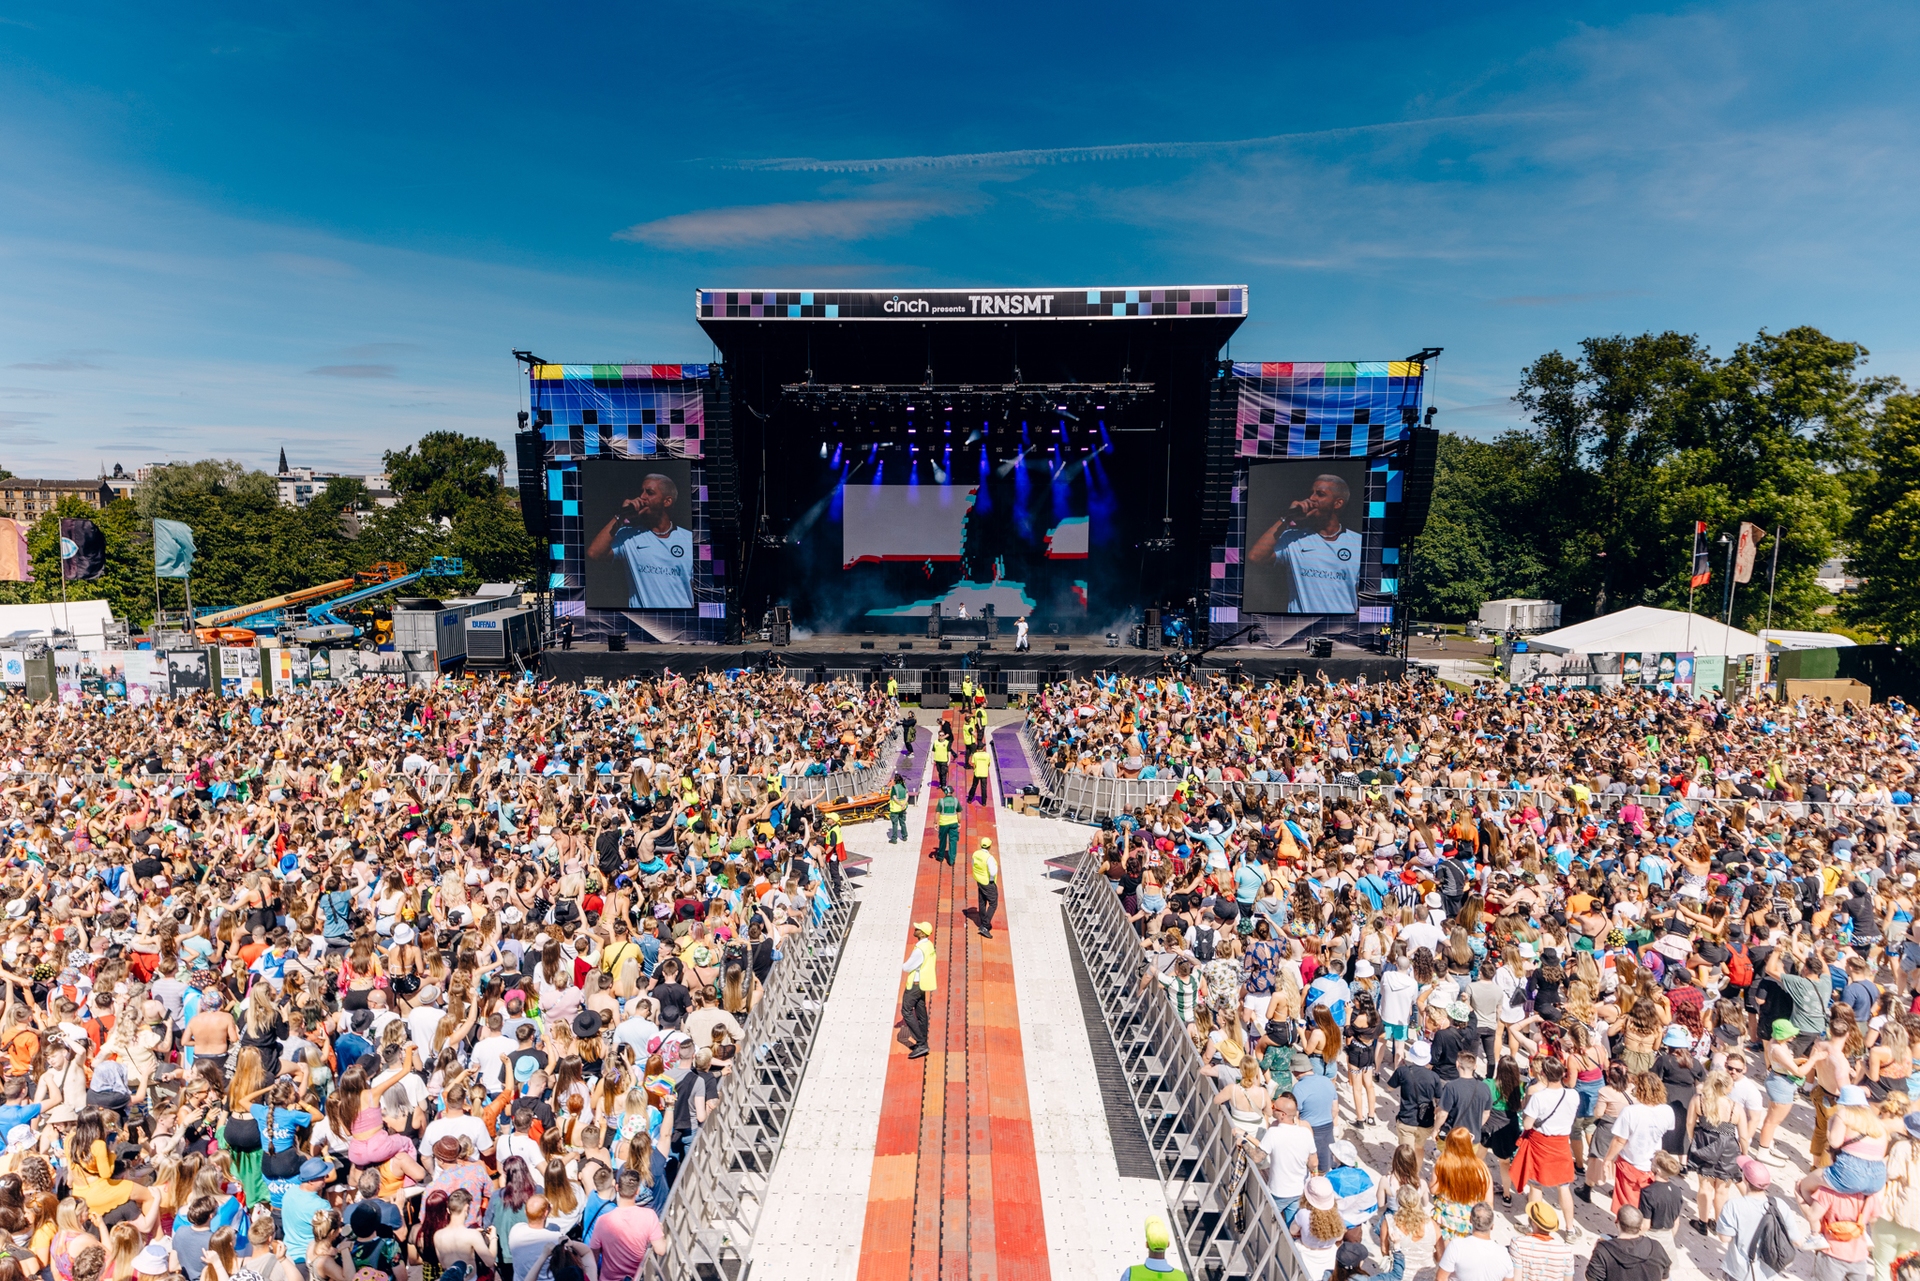 Example attracted a huge crowd, but some fans waited hours to get in after a queuing issue. (Image: TRNSMT)